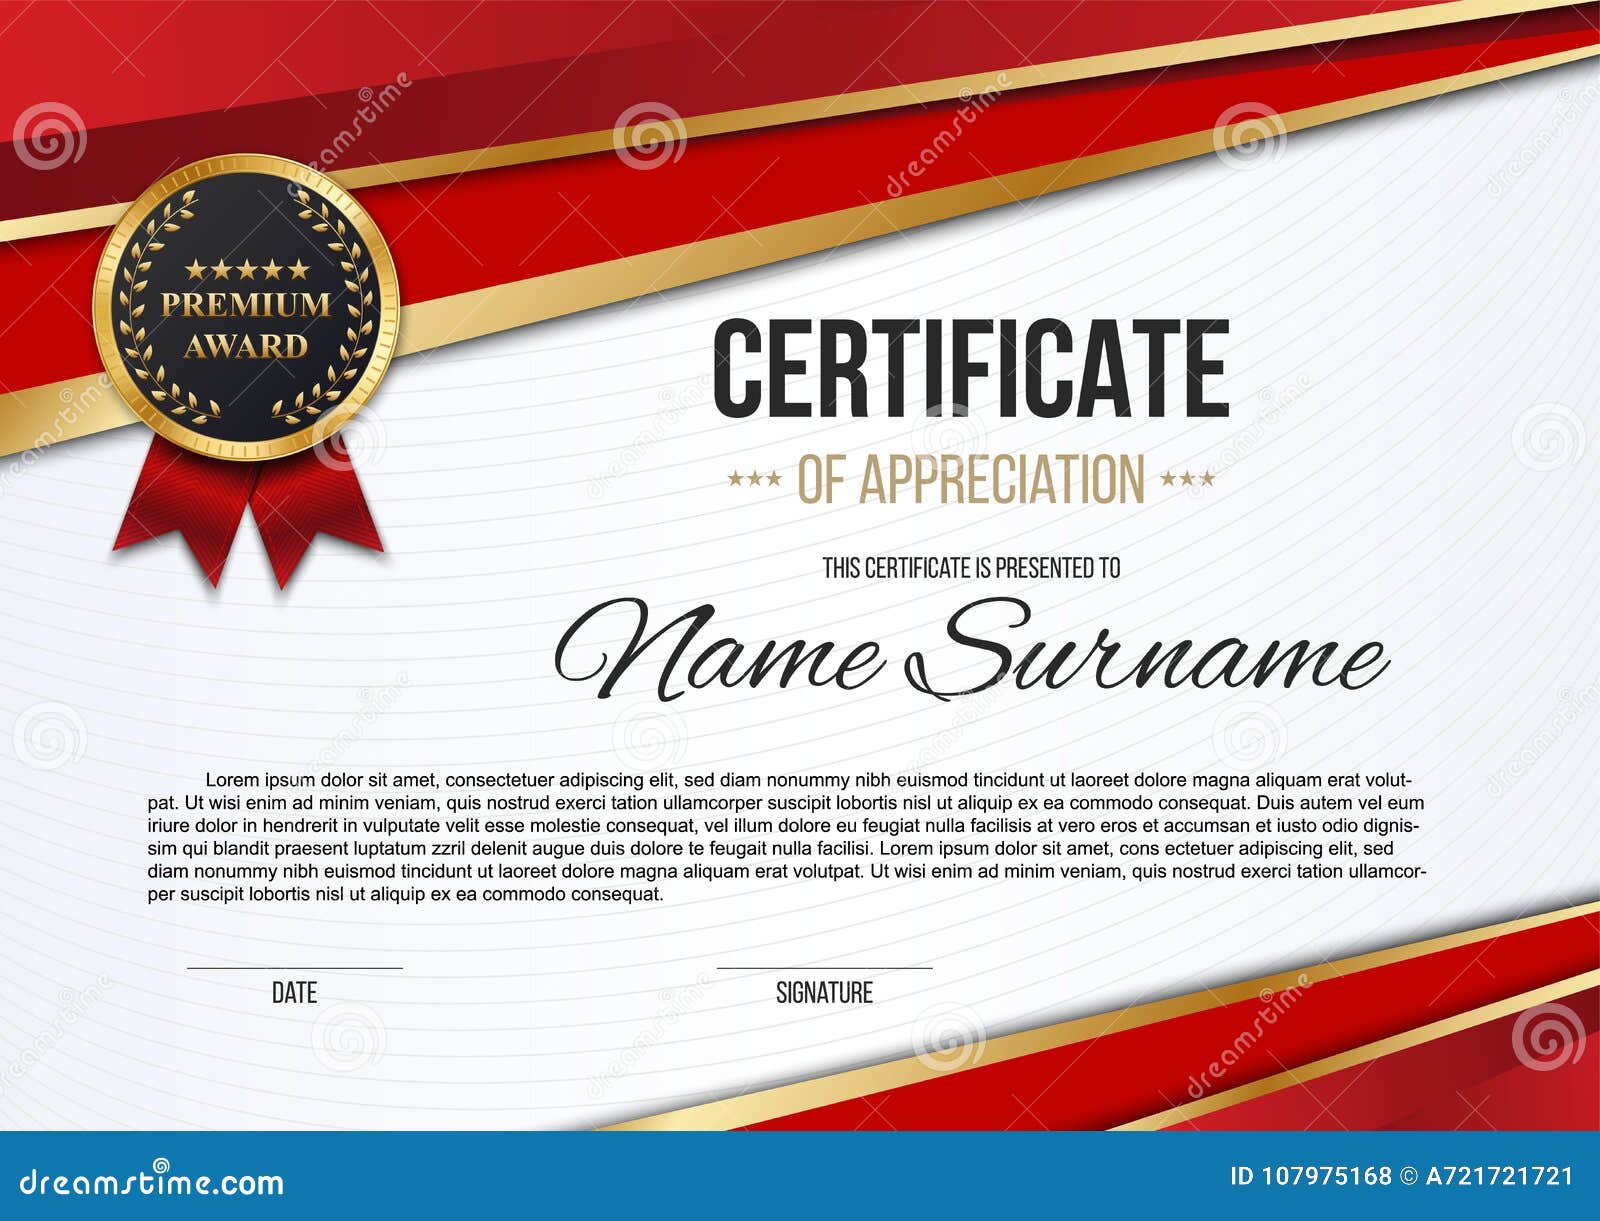 Creative Vector Illustration Of Stylish Certificate Template Of